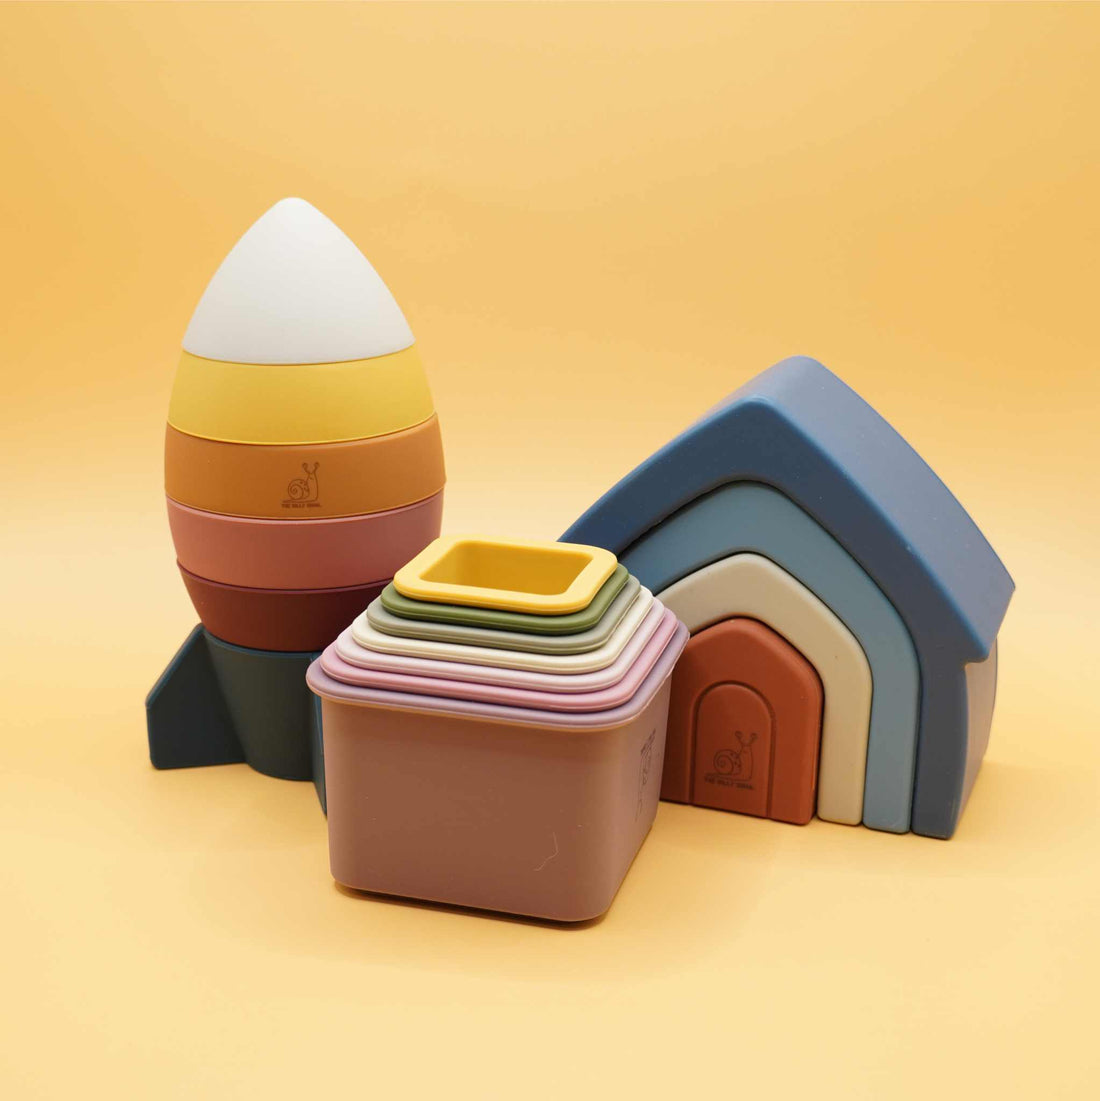 Little builders silcione stacking toy set with rocket, home, and square stacking cups